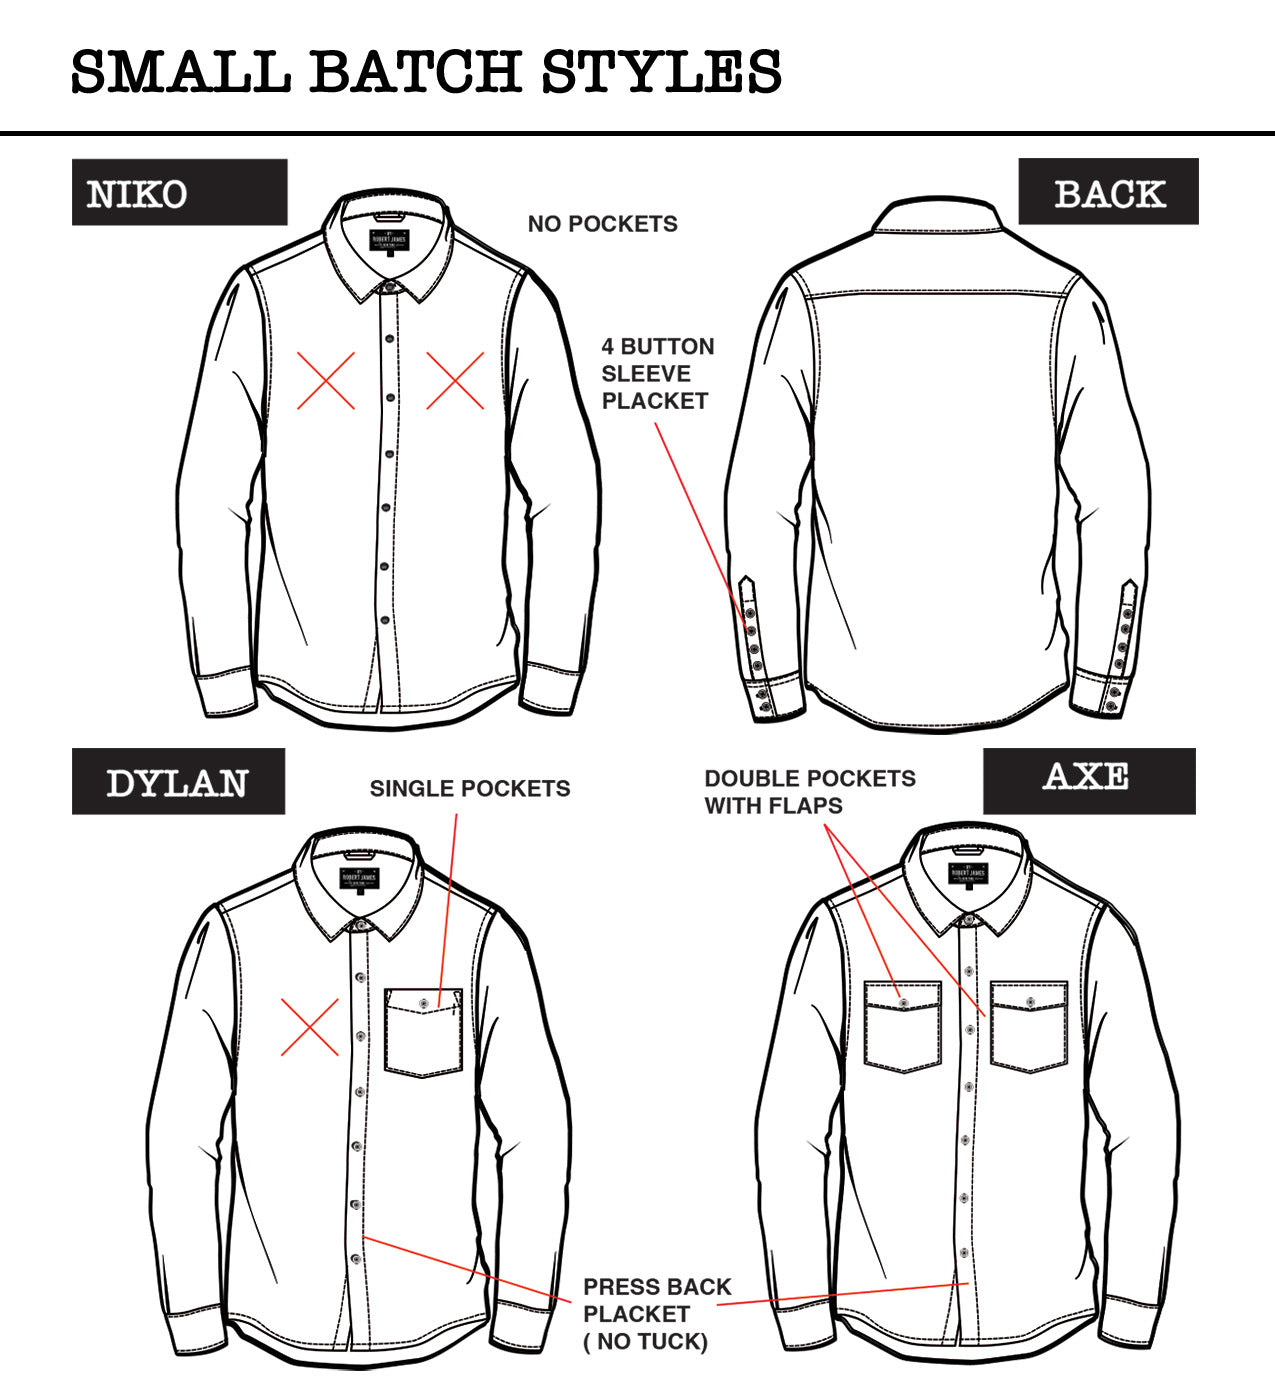 SMALL BATCH STYLES- "TOUGH & SPORTY TEXTURE"